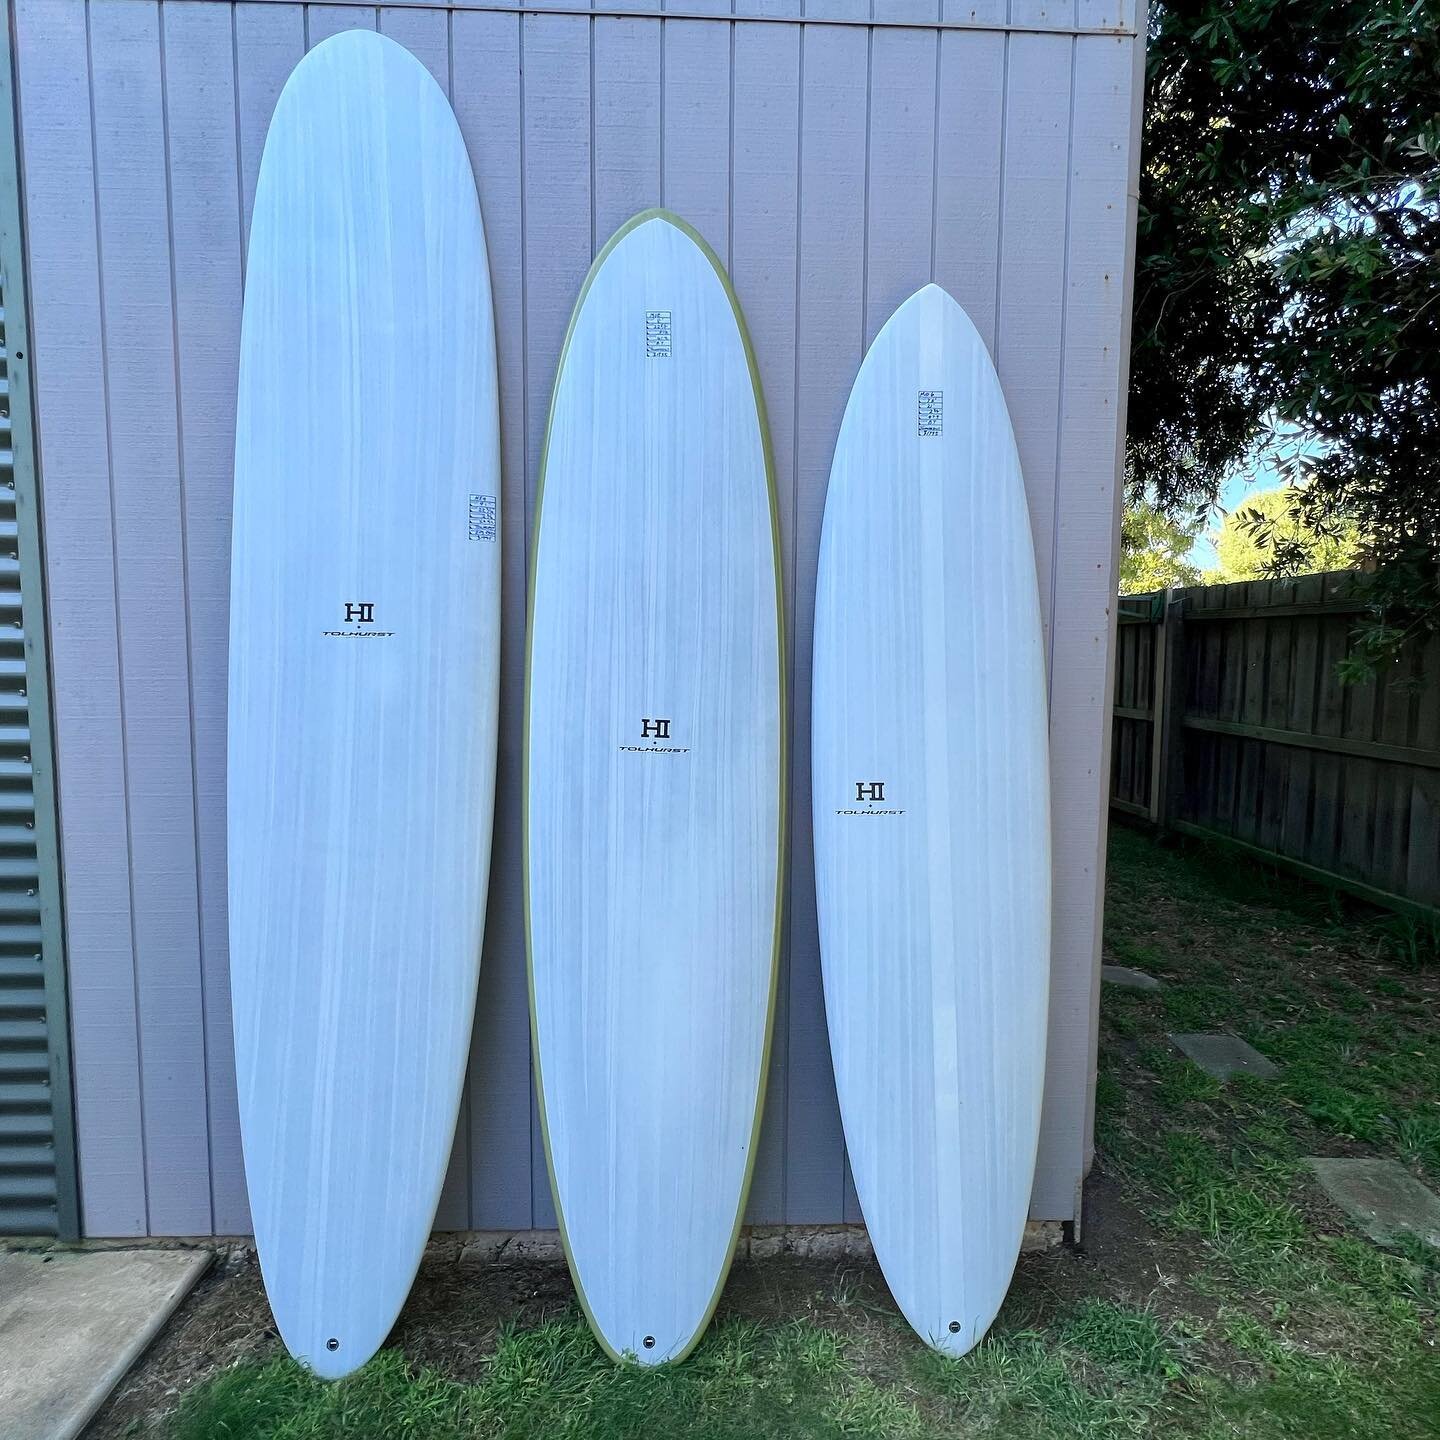 SALE -20% off our range of Tolhurst and Firewire Surfboards until 31 January. Get in quick!

@firewiresurfboards 
@tolhurstsurfboards